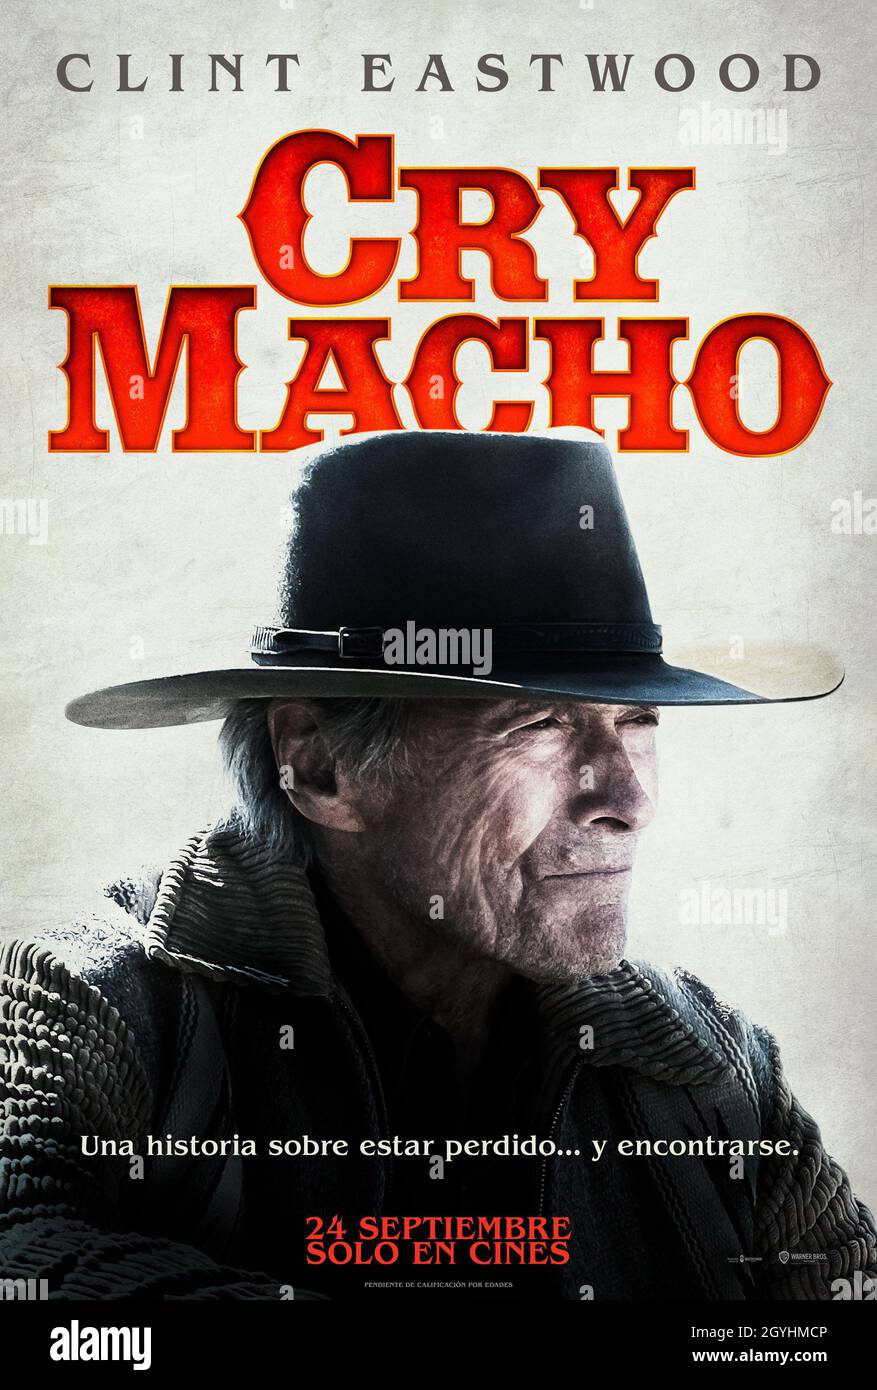 Cry Macho (2021) directed by Clint Eastwood and starring Clint Eastwood,  Dwight Yoakam and Daniel V. Graulau. A one-time rodeo star and washed-up  horse breeder takes a job to bring a man's